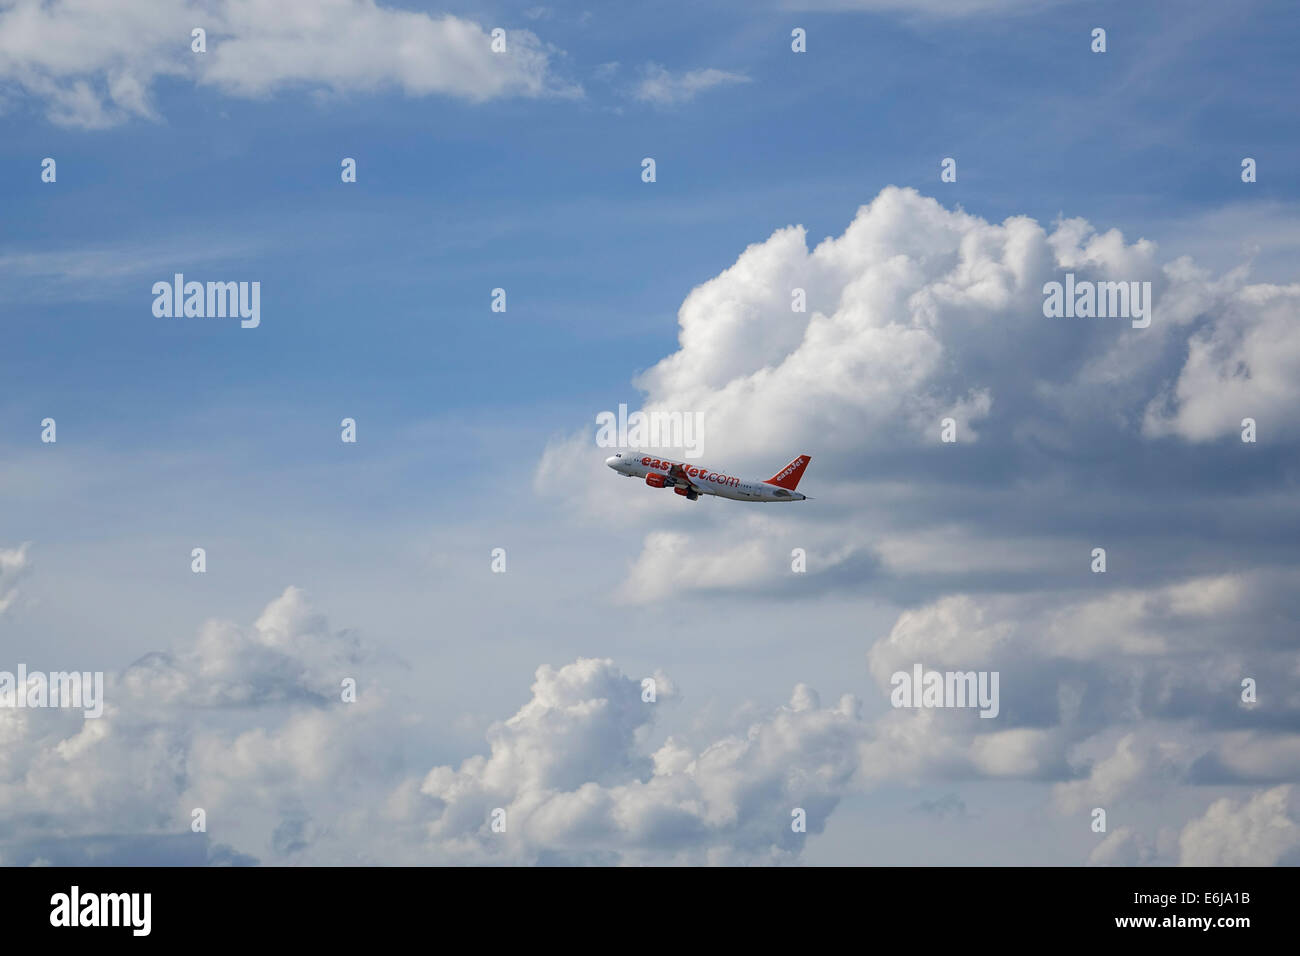 Passenger aircraft by easyJet, after take-off from the airport in Munich, Bavaria, Germany, Europe Stock Photo